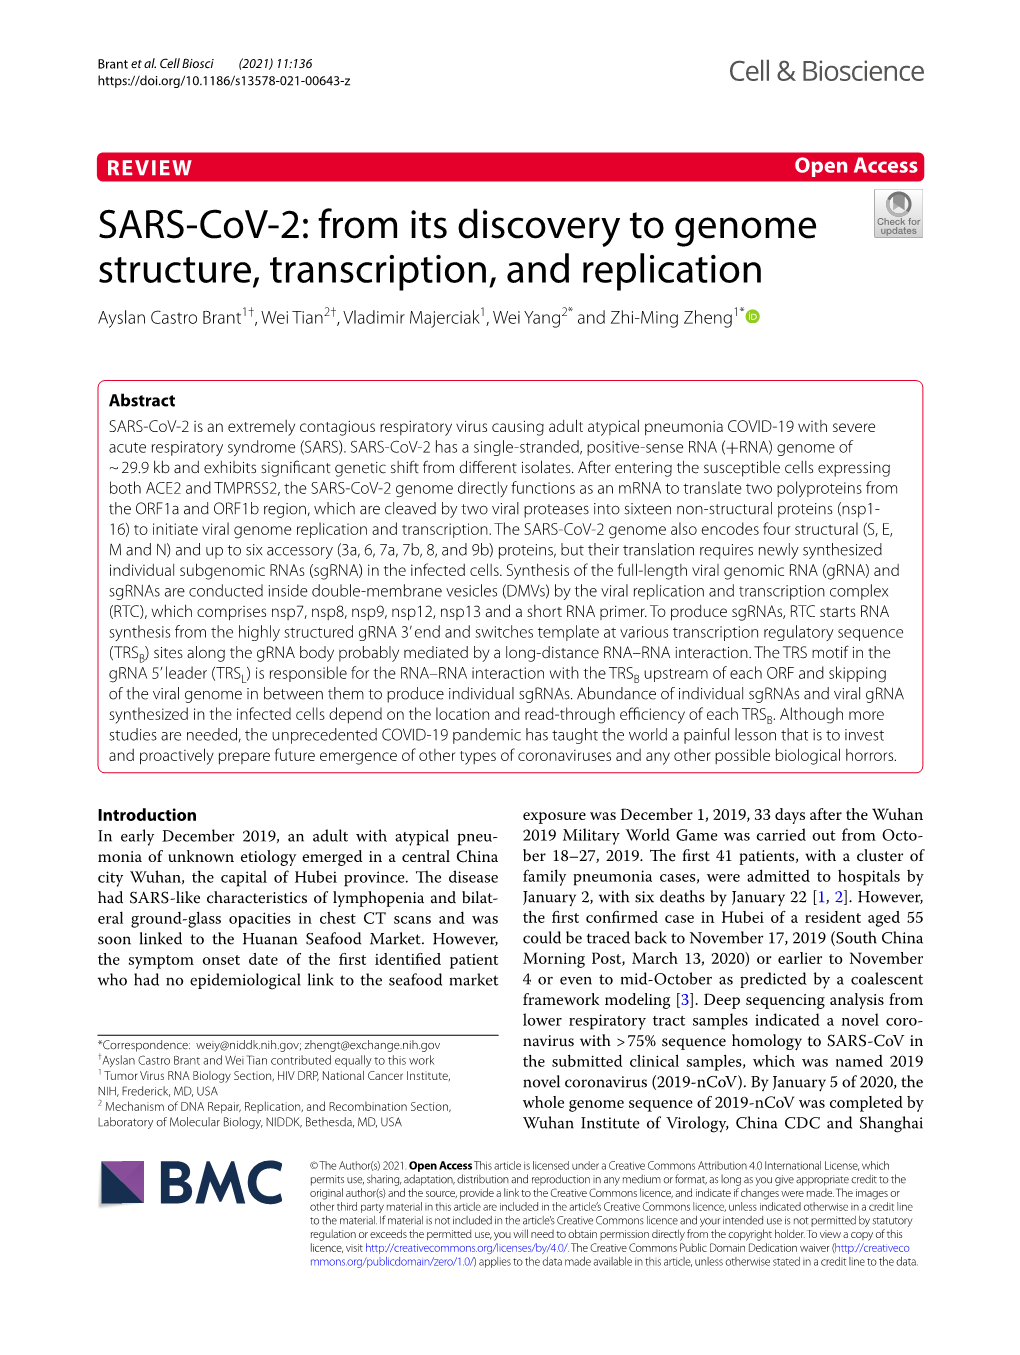 SARS-Cov-2: from Its Discovery to Genome Structure, Transcription, and Replication